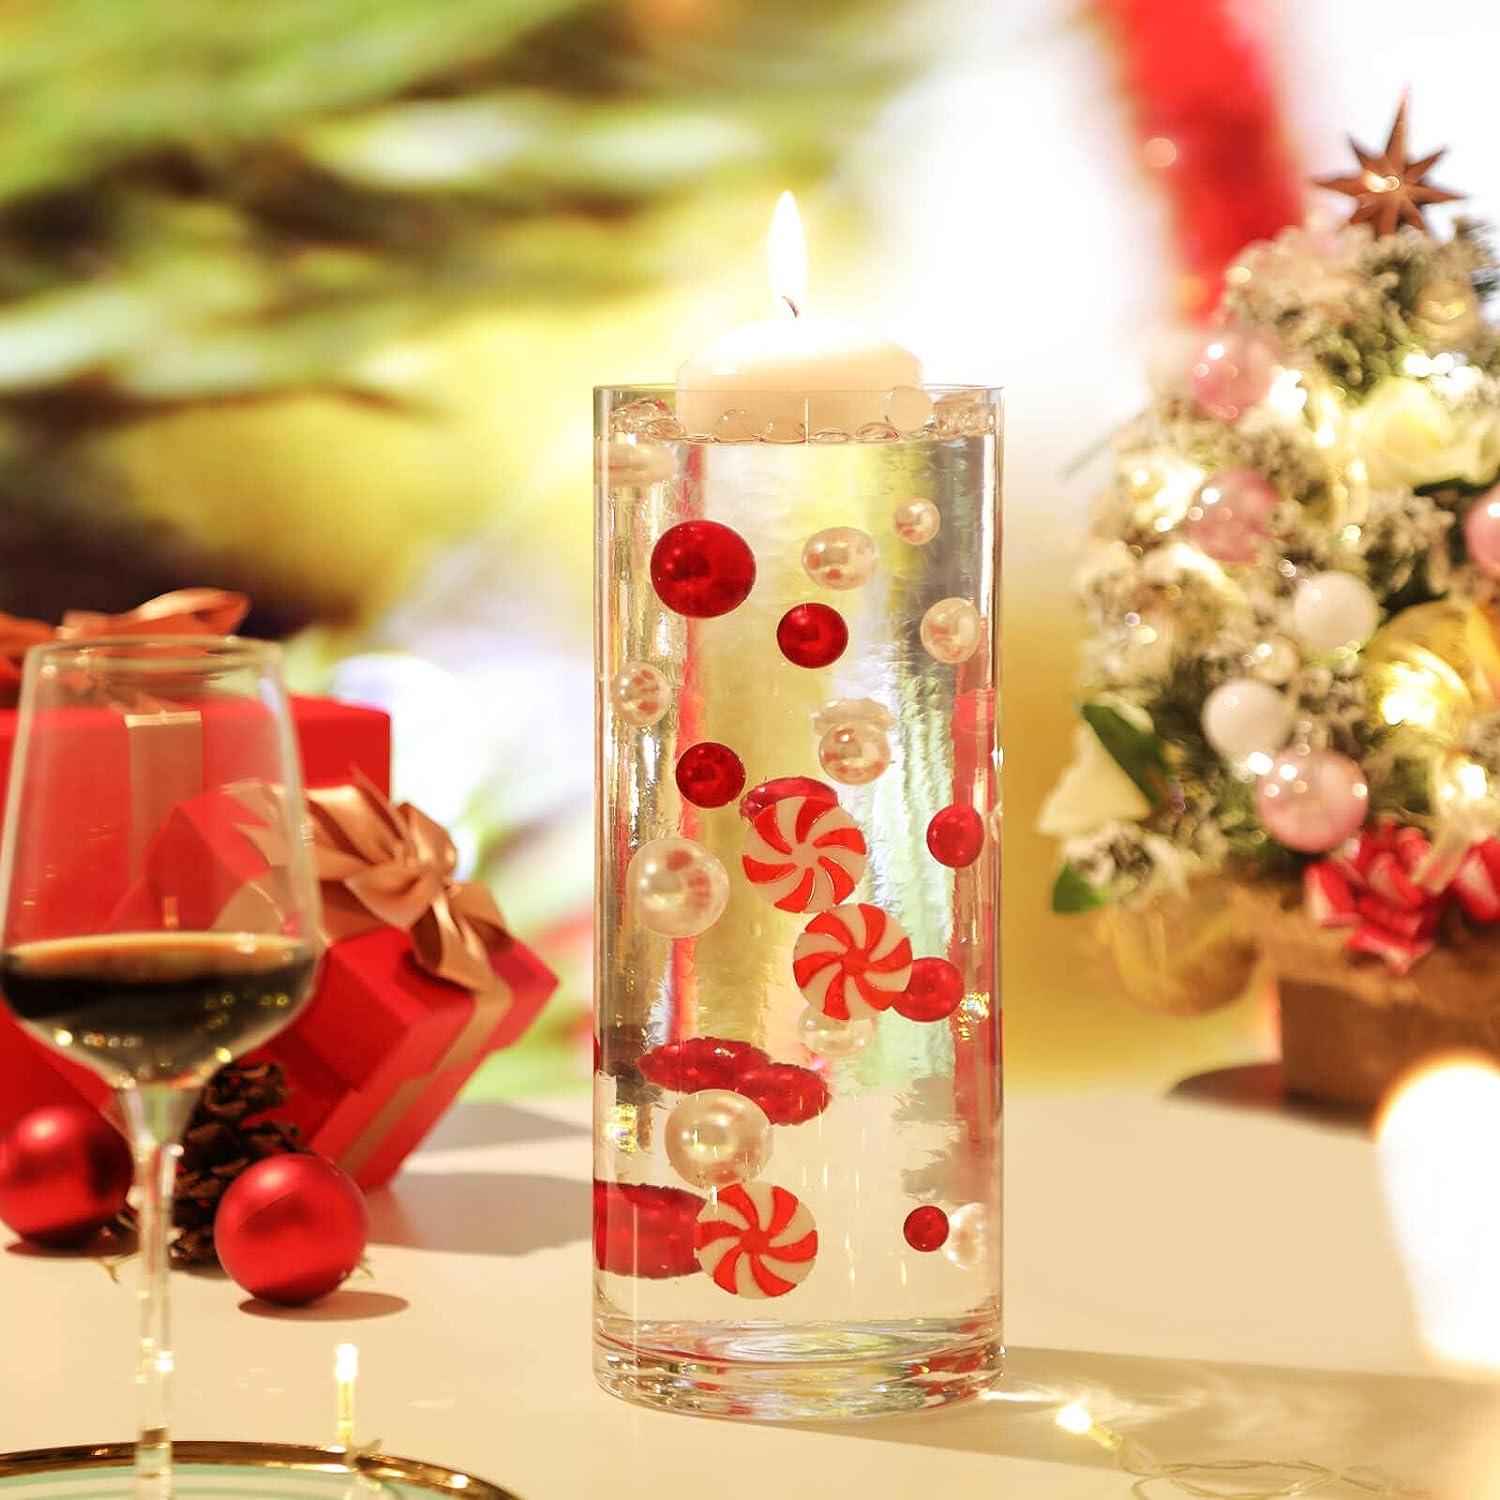 Lingouzi Christmas Vase Filler Beads Floating Pearls Water Gel Beads For  Vase Filler Table Centerpiecesadd a strong Christmas theme atmosphere